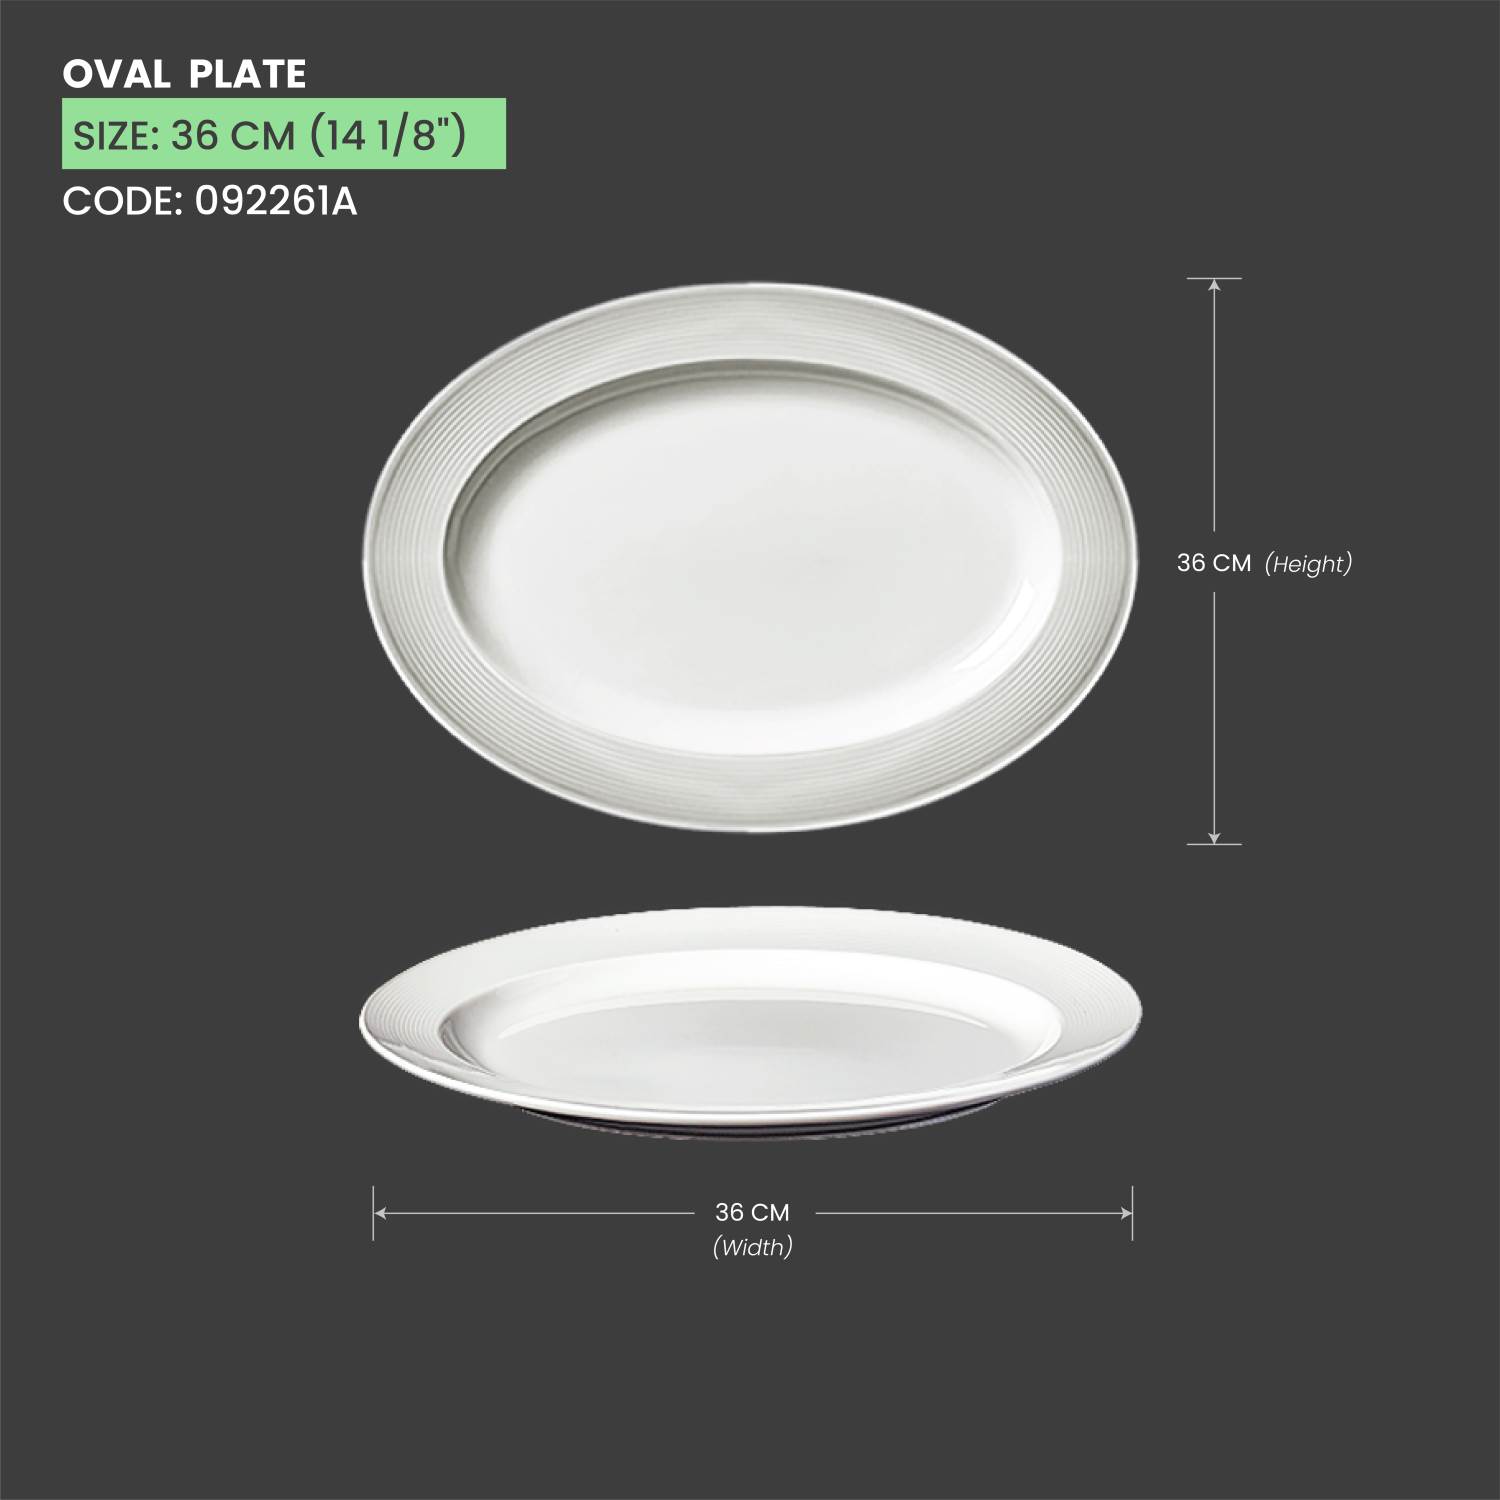 Baralee Wish Oval Plate